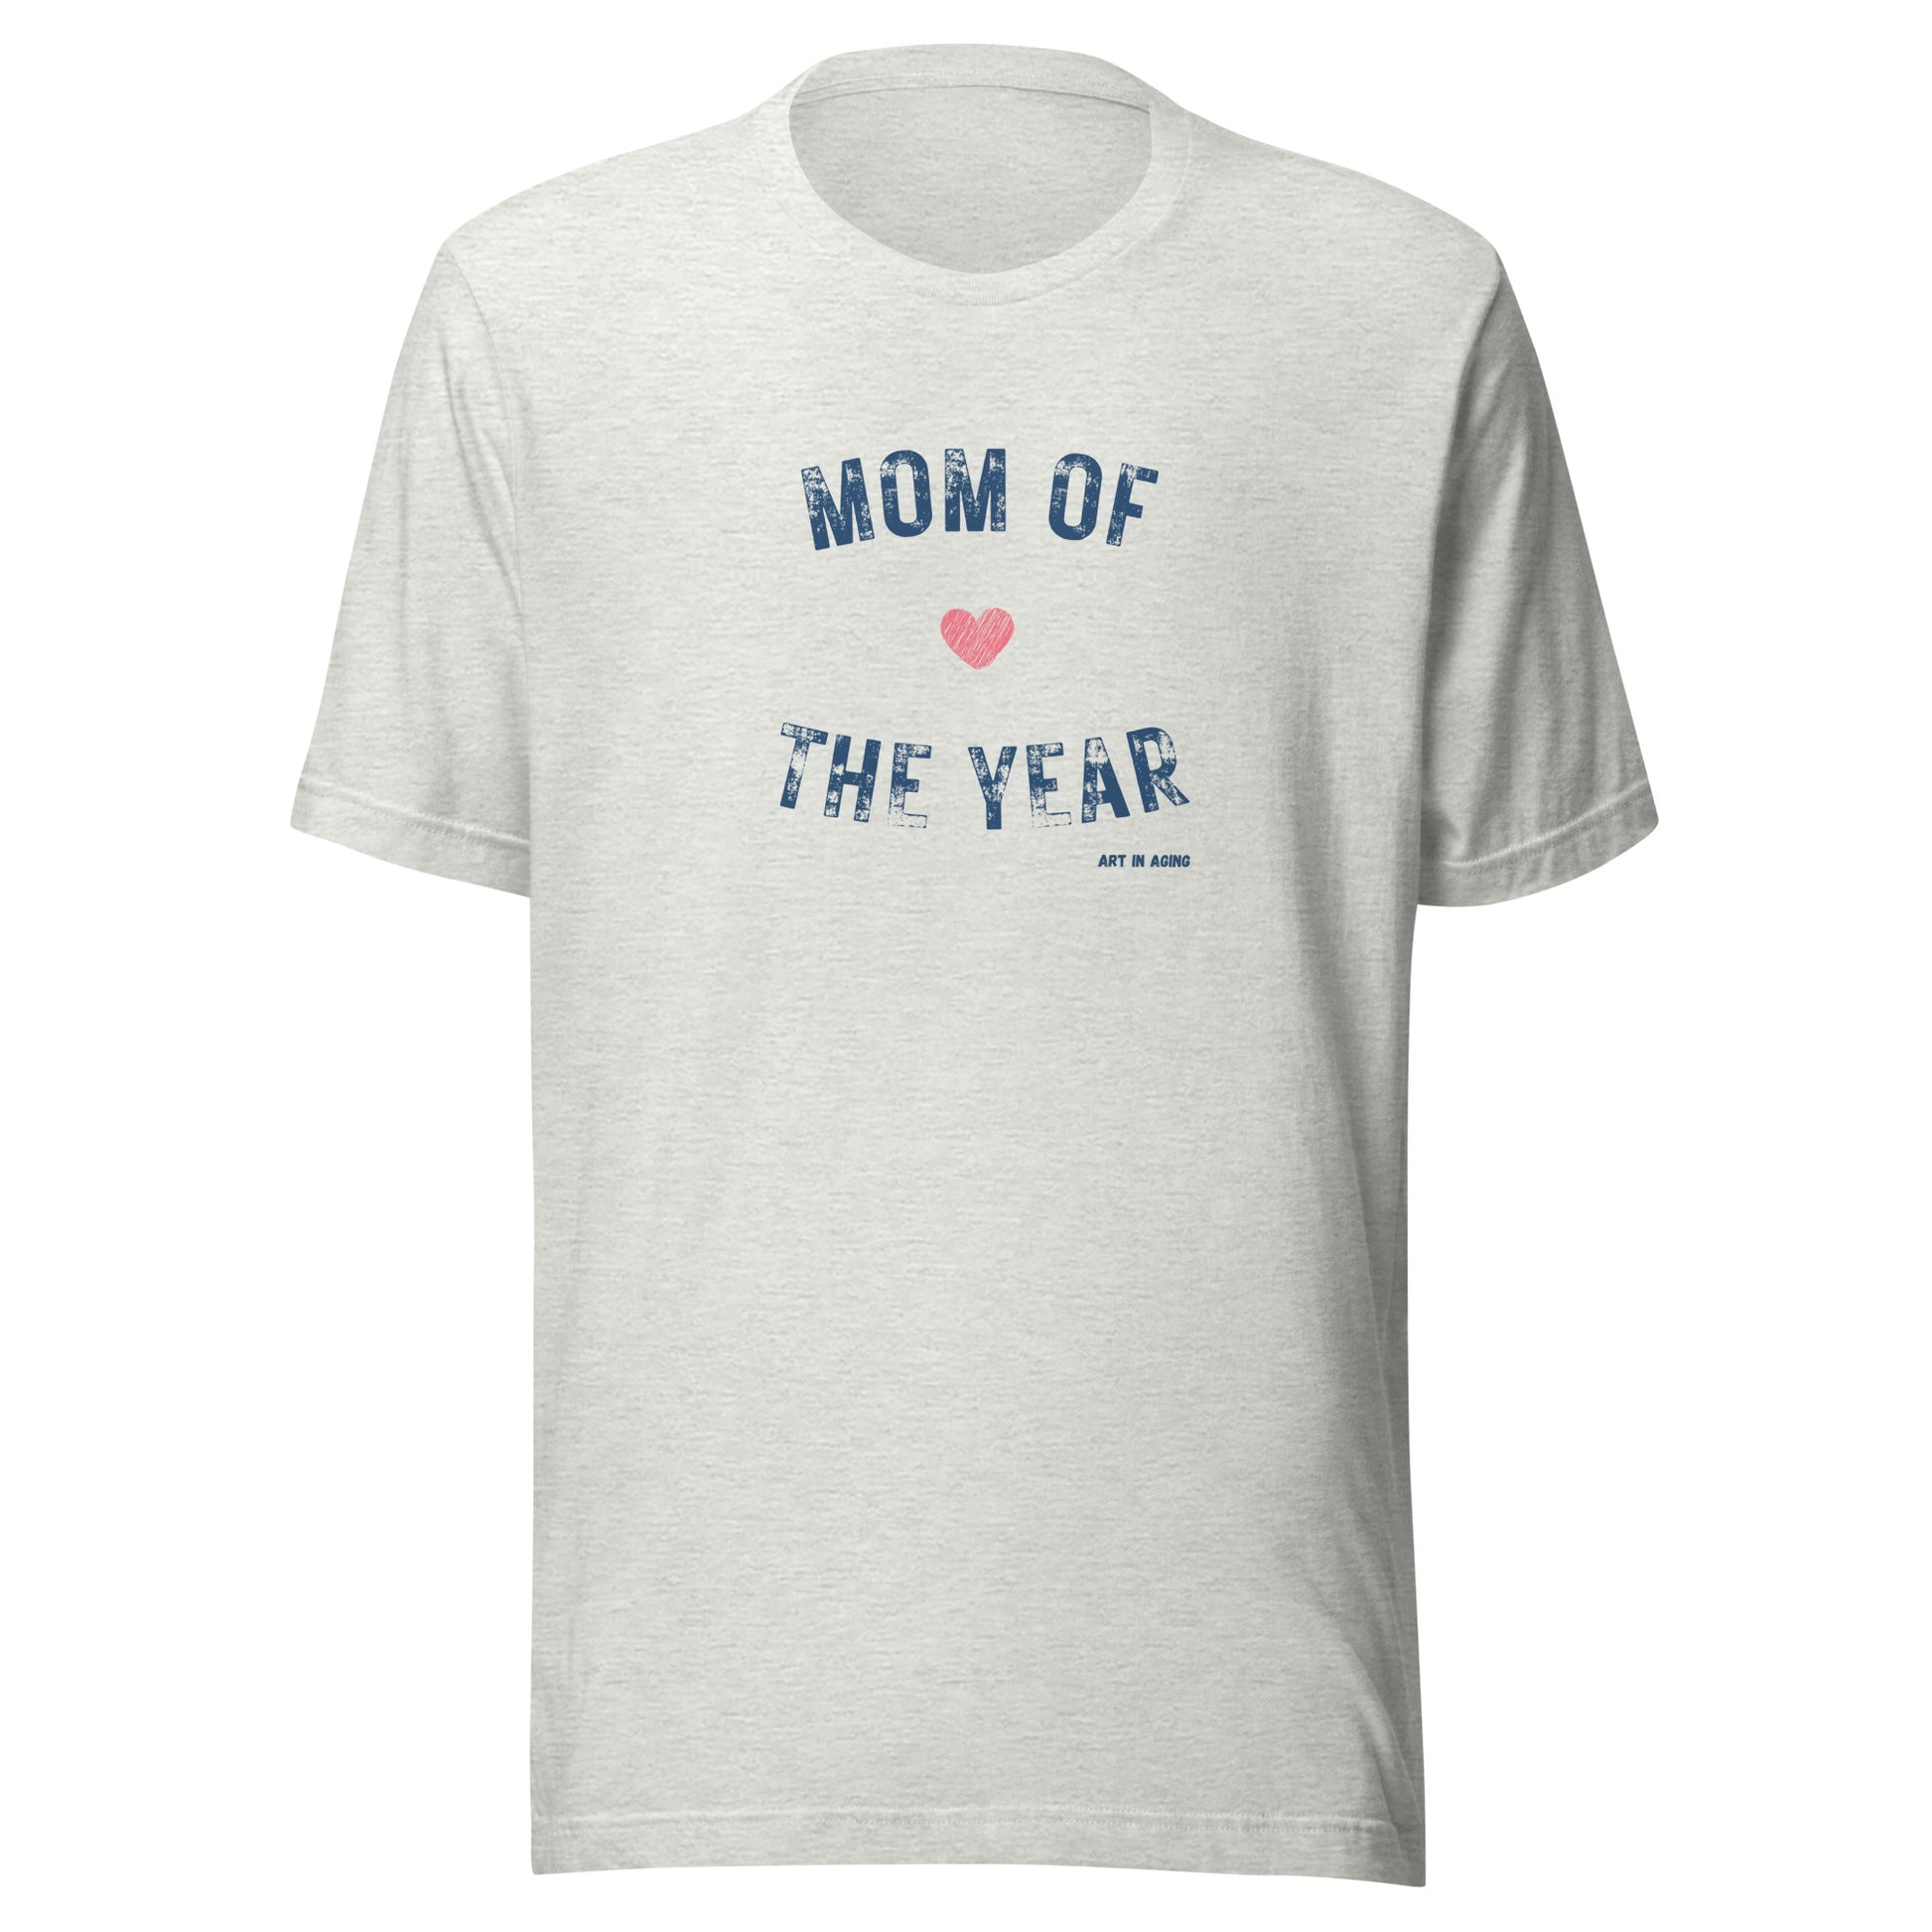 Mom of the Year T-Shirt | Art in Aging